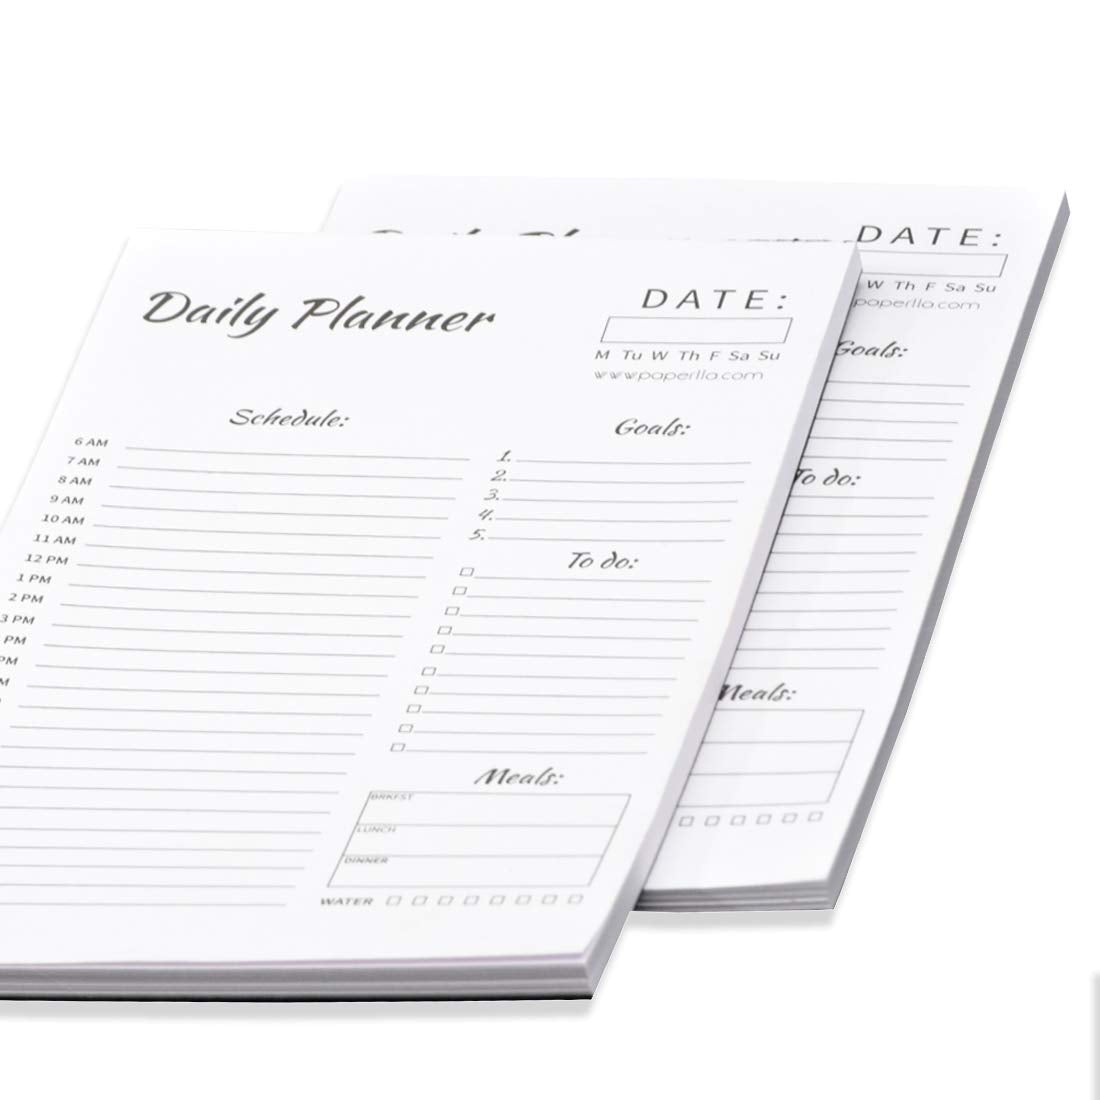 Daily to DO List Notepad| Desktop Planner PAD with Schedule, Meal and Water Intake Tracker, Reminder| Cute Home Office School Supplies |UNDATED 50 Sheets Each|Set of 2 Writing Pads